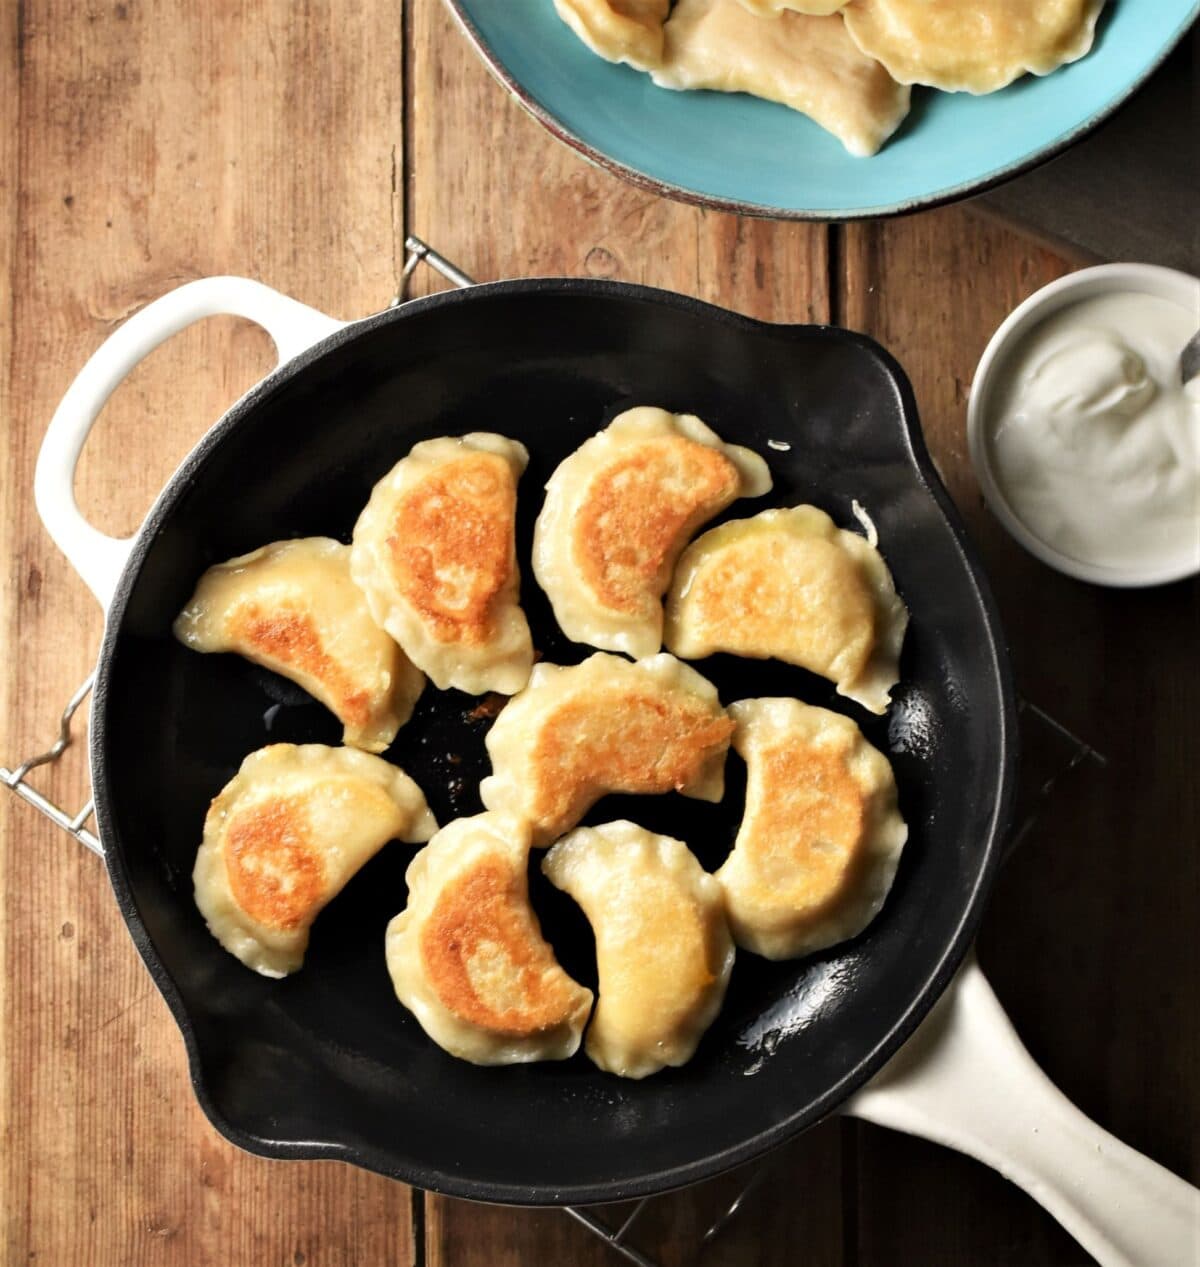 Fried pierogies in pan with sour cream and pierogies in blue bowl in background.